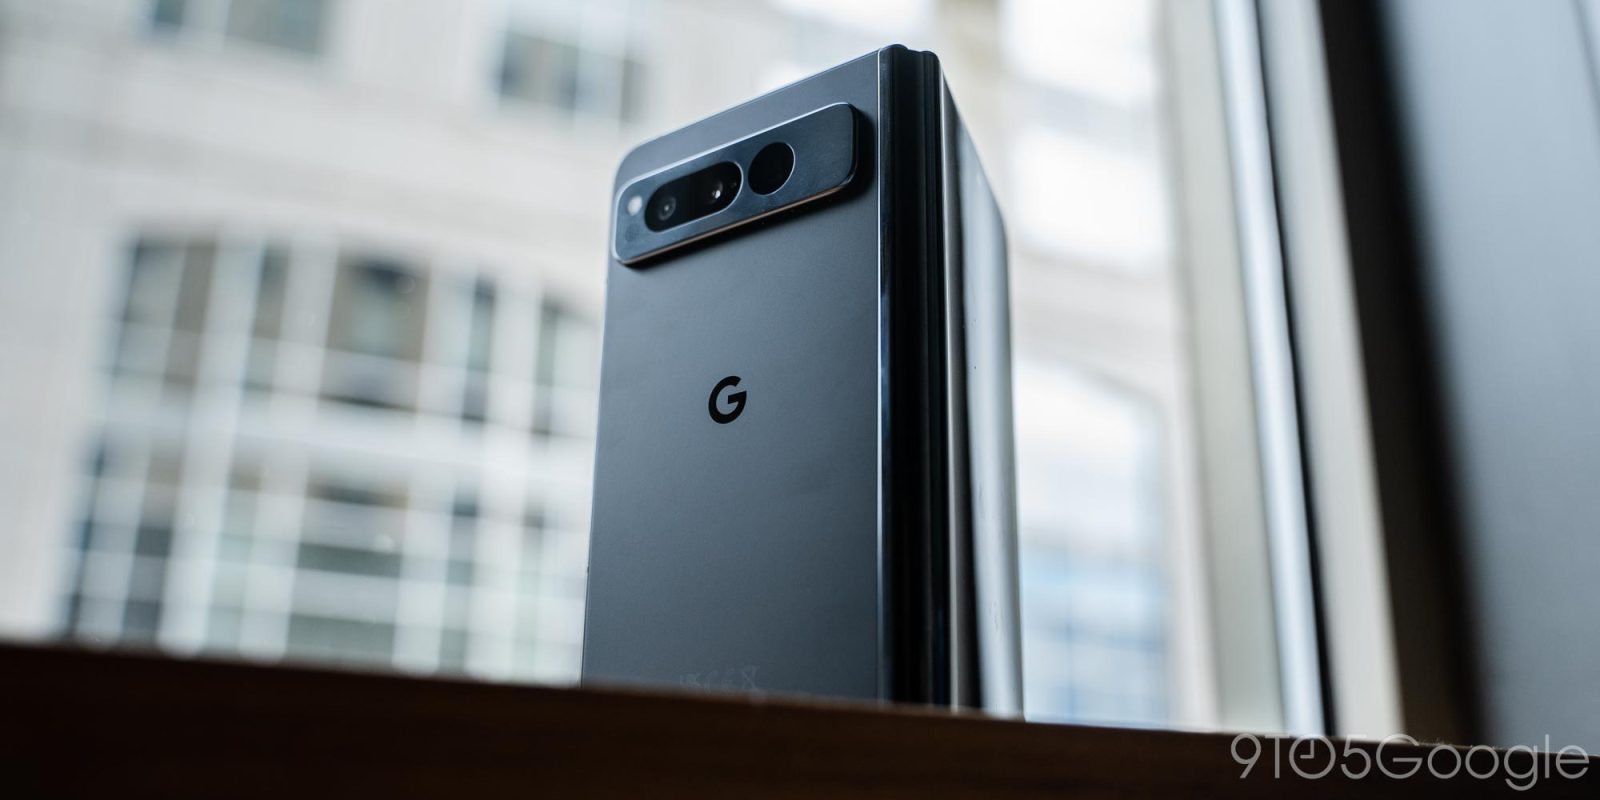 Original Pixel Stand is a better deal than new one, for Pixel 6 - 9to5Google